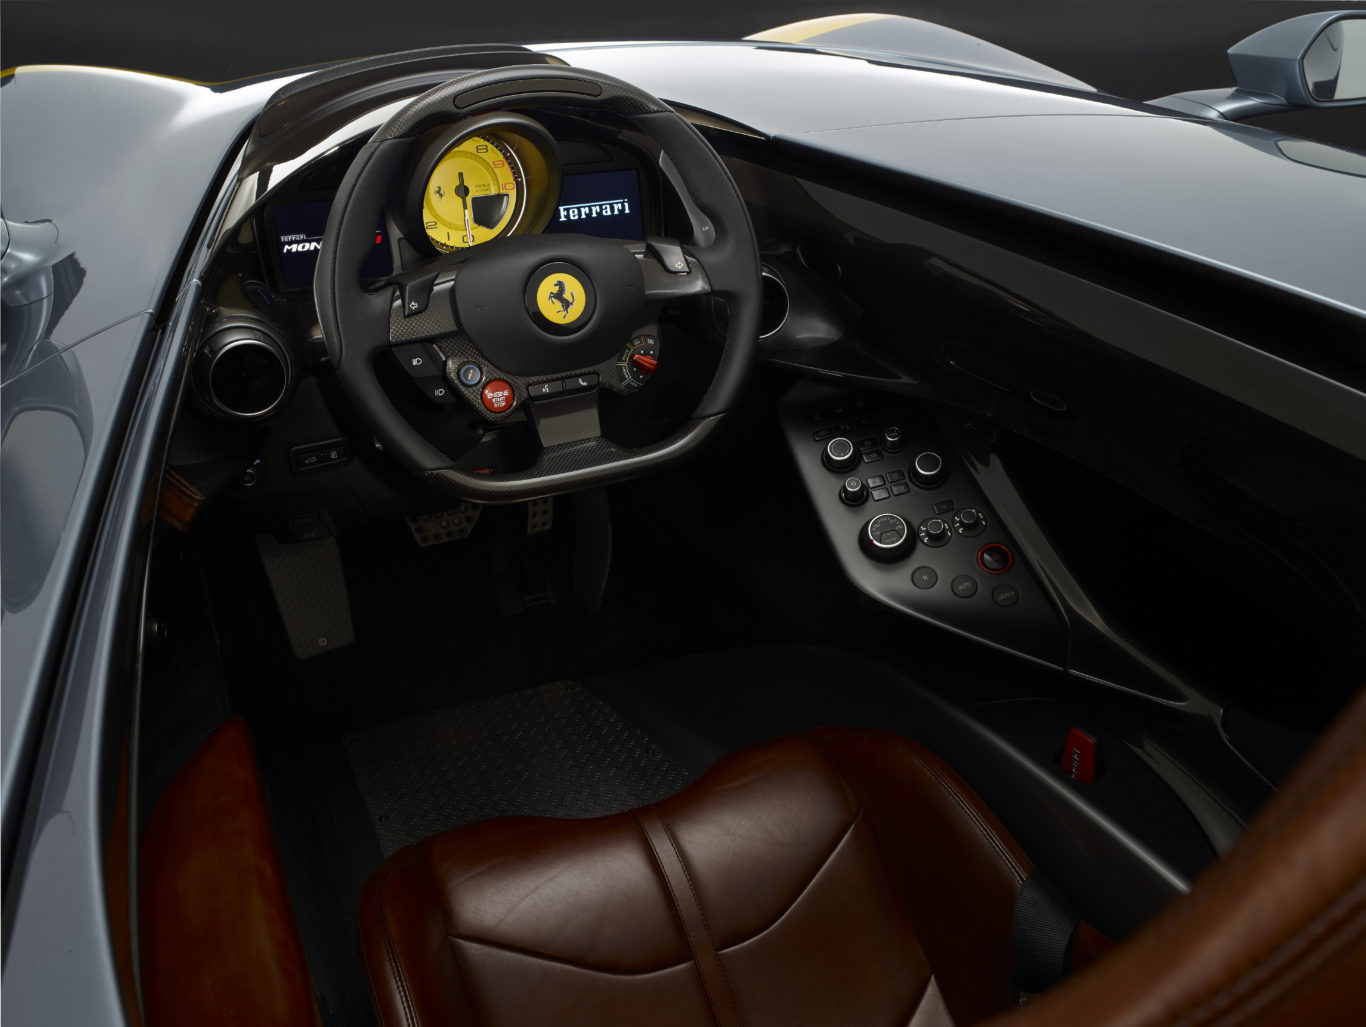 The interior of the SP1 is based around a single seat 